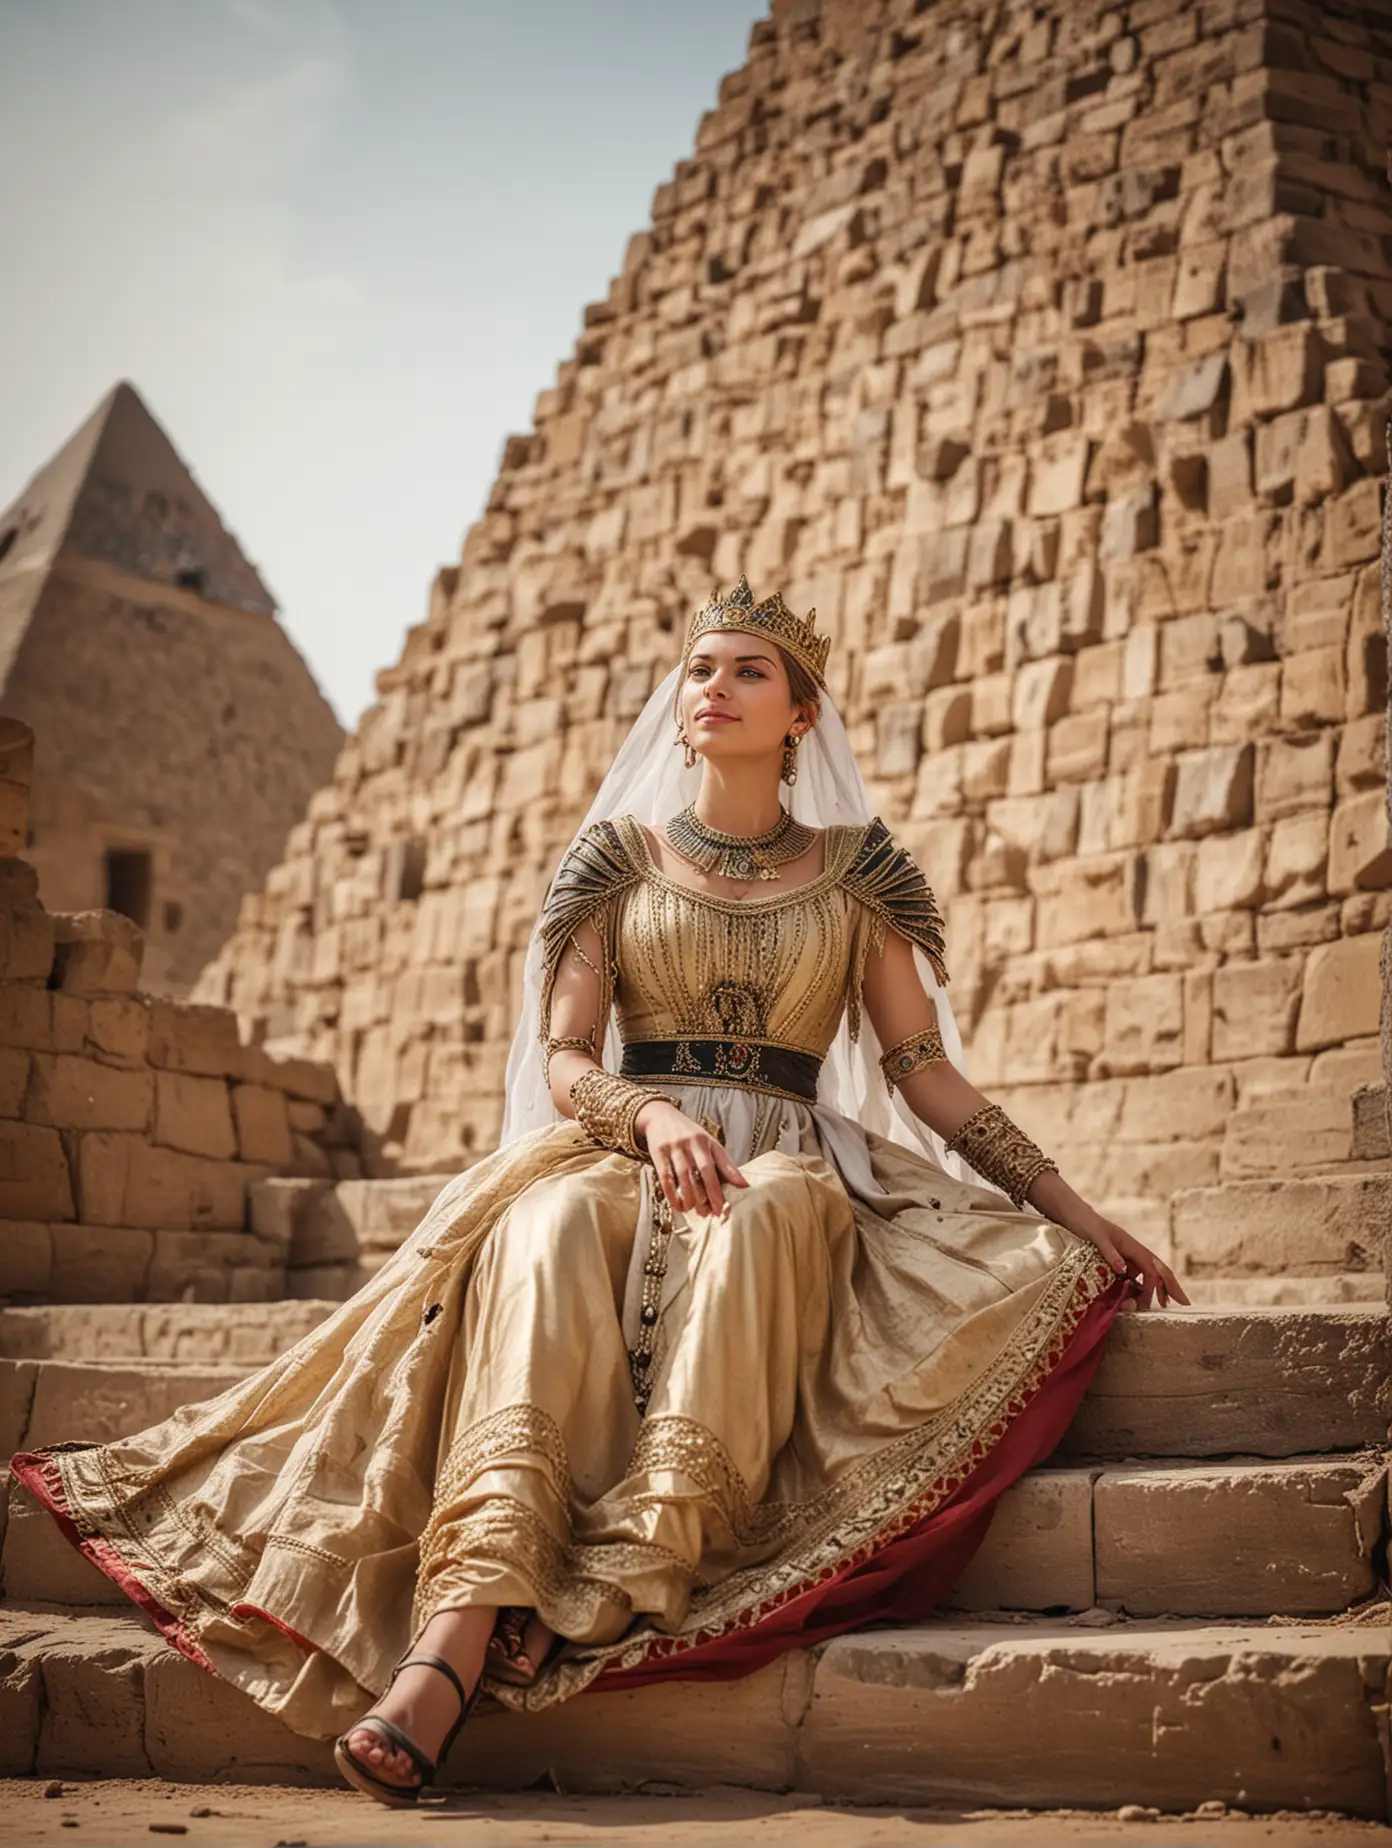 European-Woman-in-Egyptian-Queen-Dress-at-Medieval-Pyramid